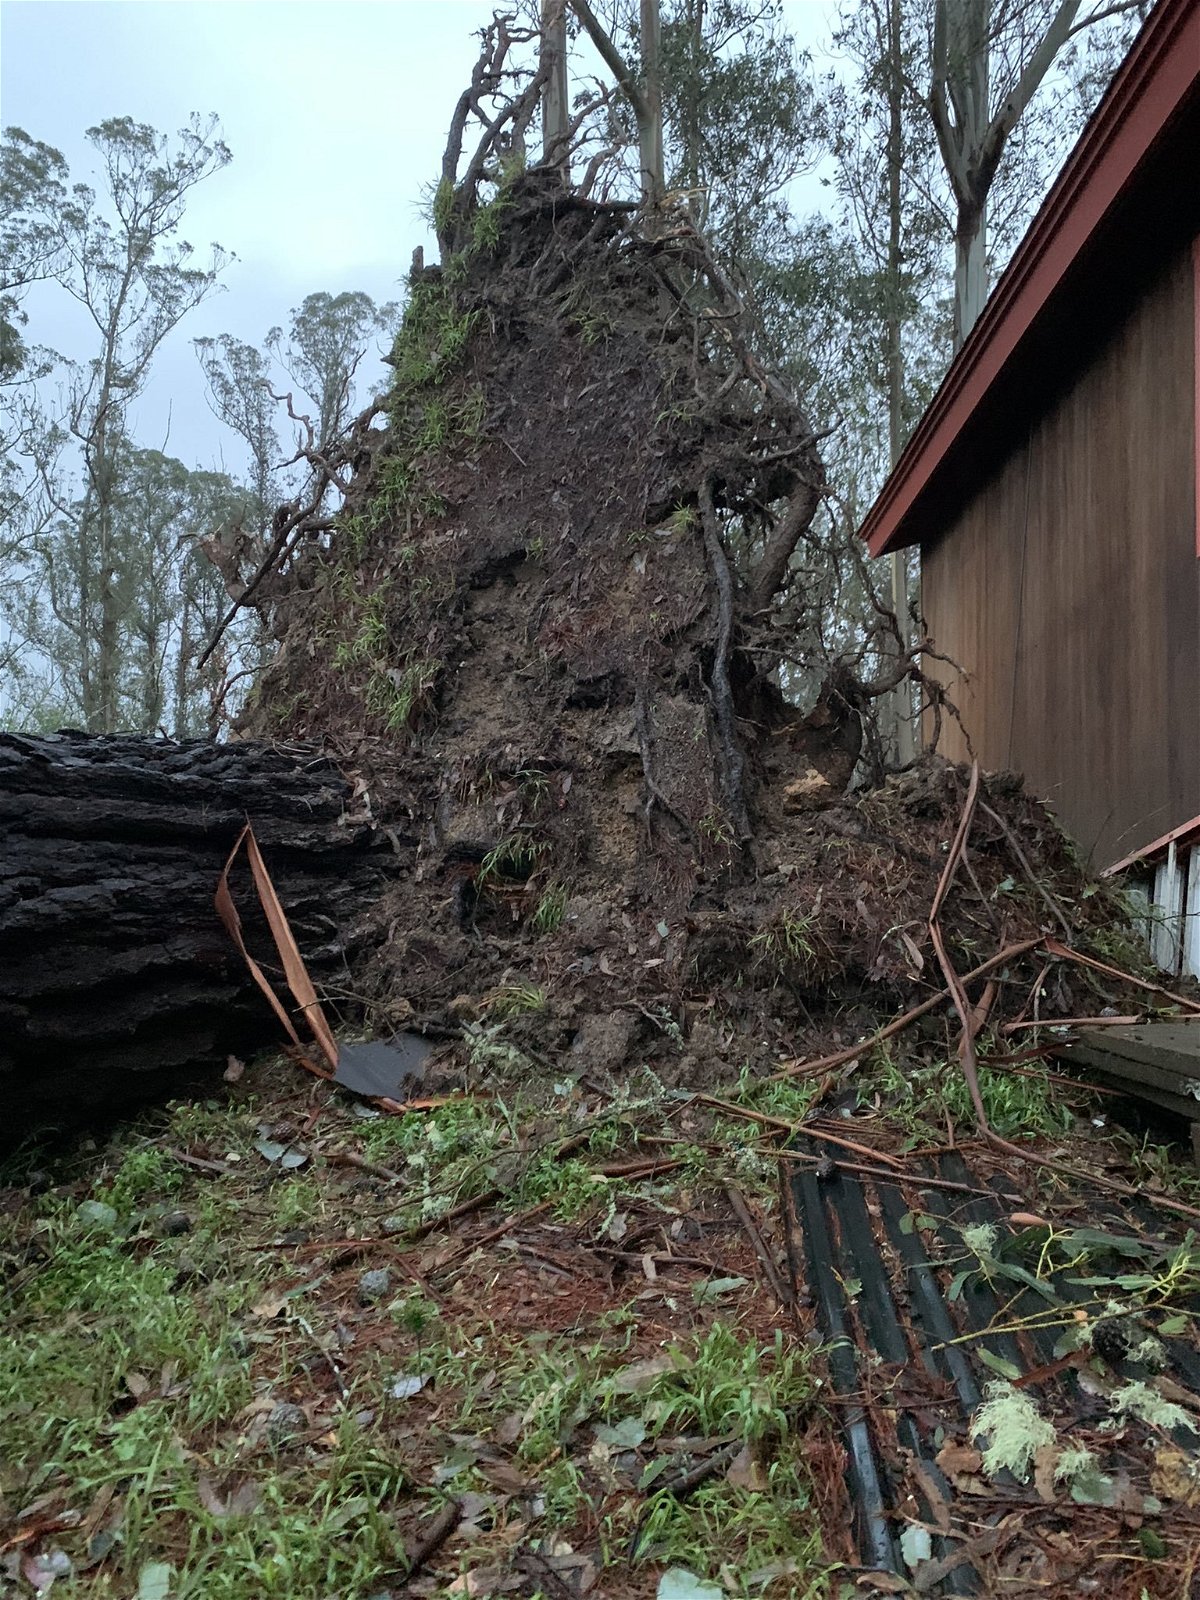 This image shows damaged a downed tree in the El Granada area of the San Mateo County.